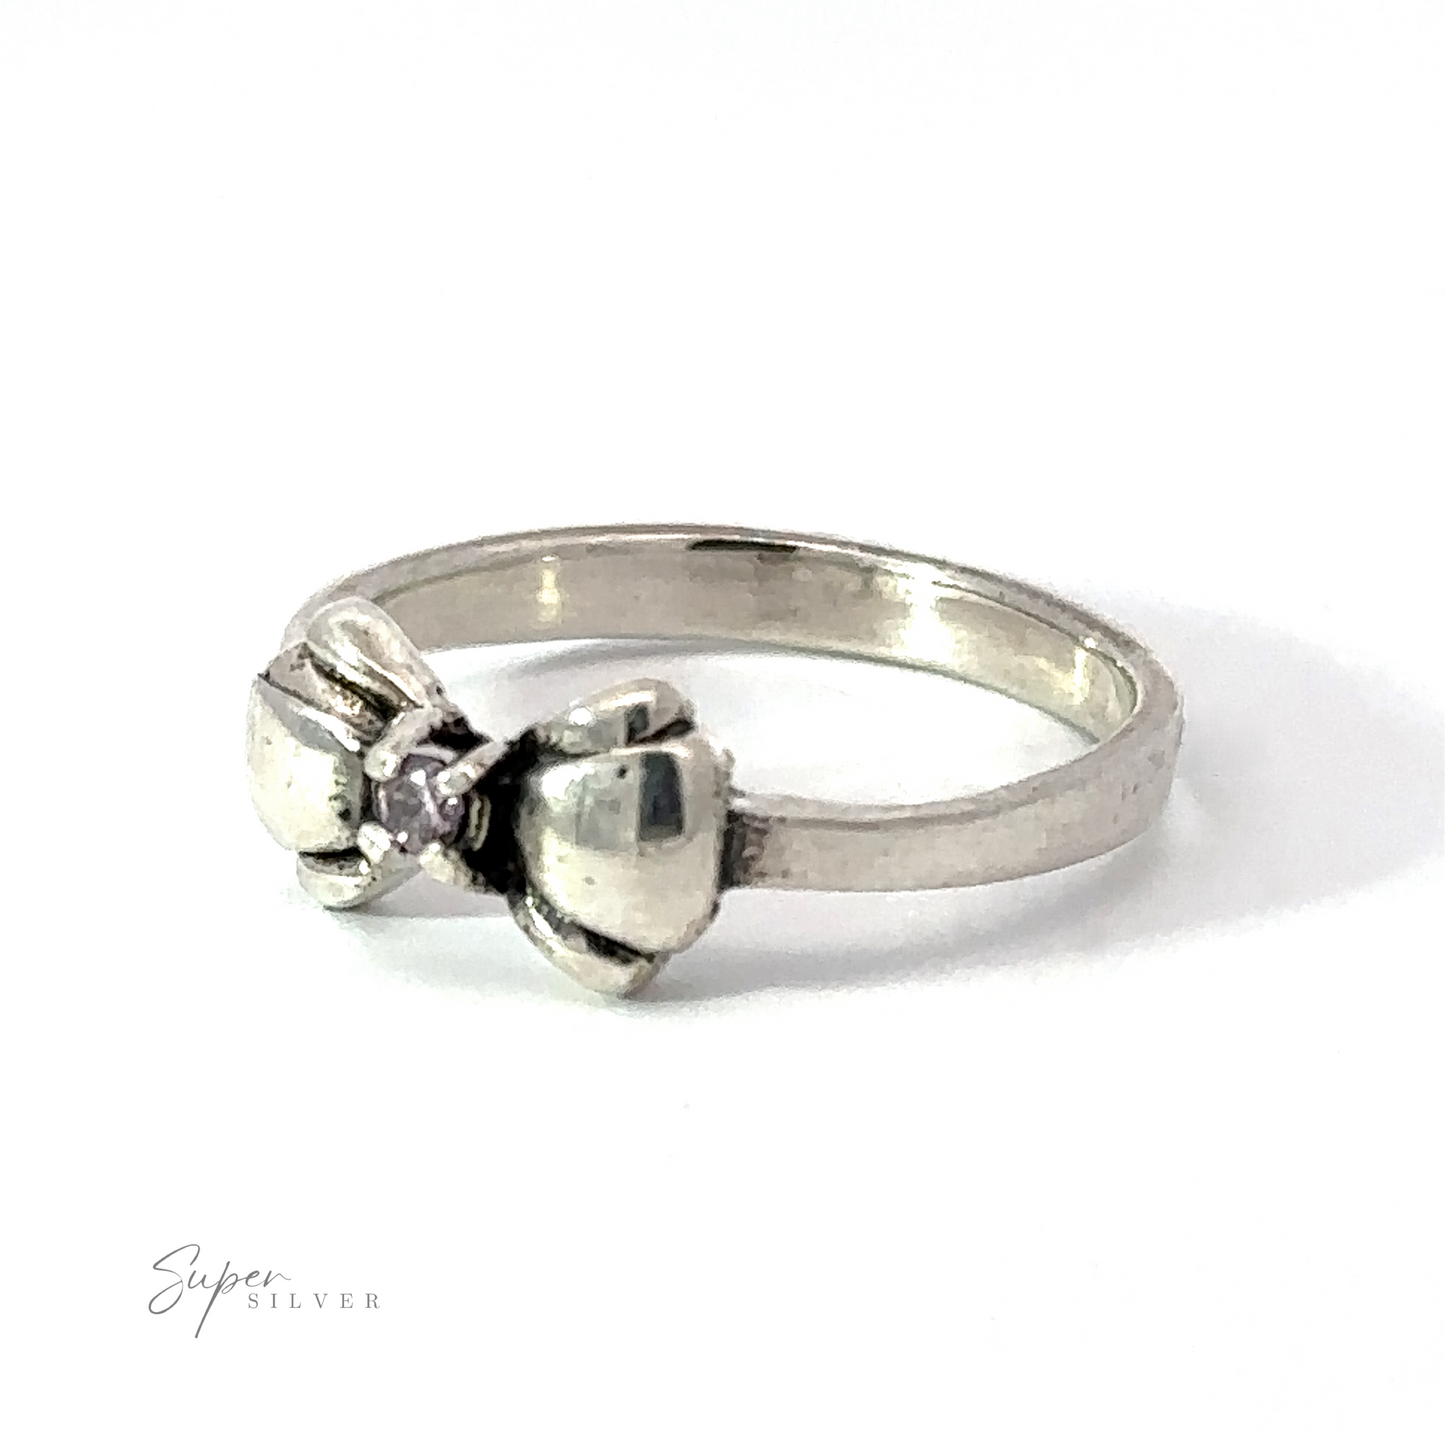 
                  
                    An Adorable Cubic Zirconia Bow Ring adorned with a black cubic zirconia at its center. The brand name, "Super Silver," is elegantly displayed in the bottom left corner of the image.
                  
                